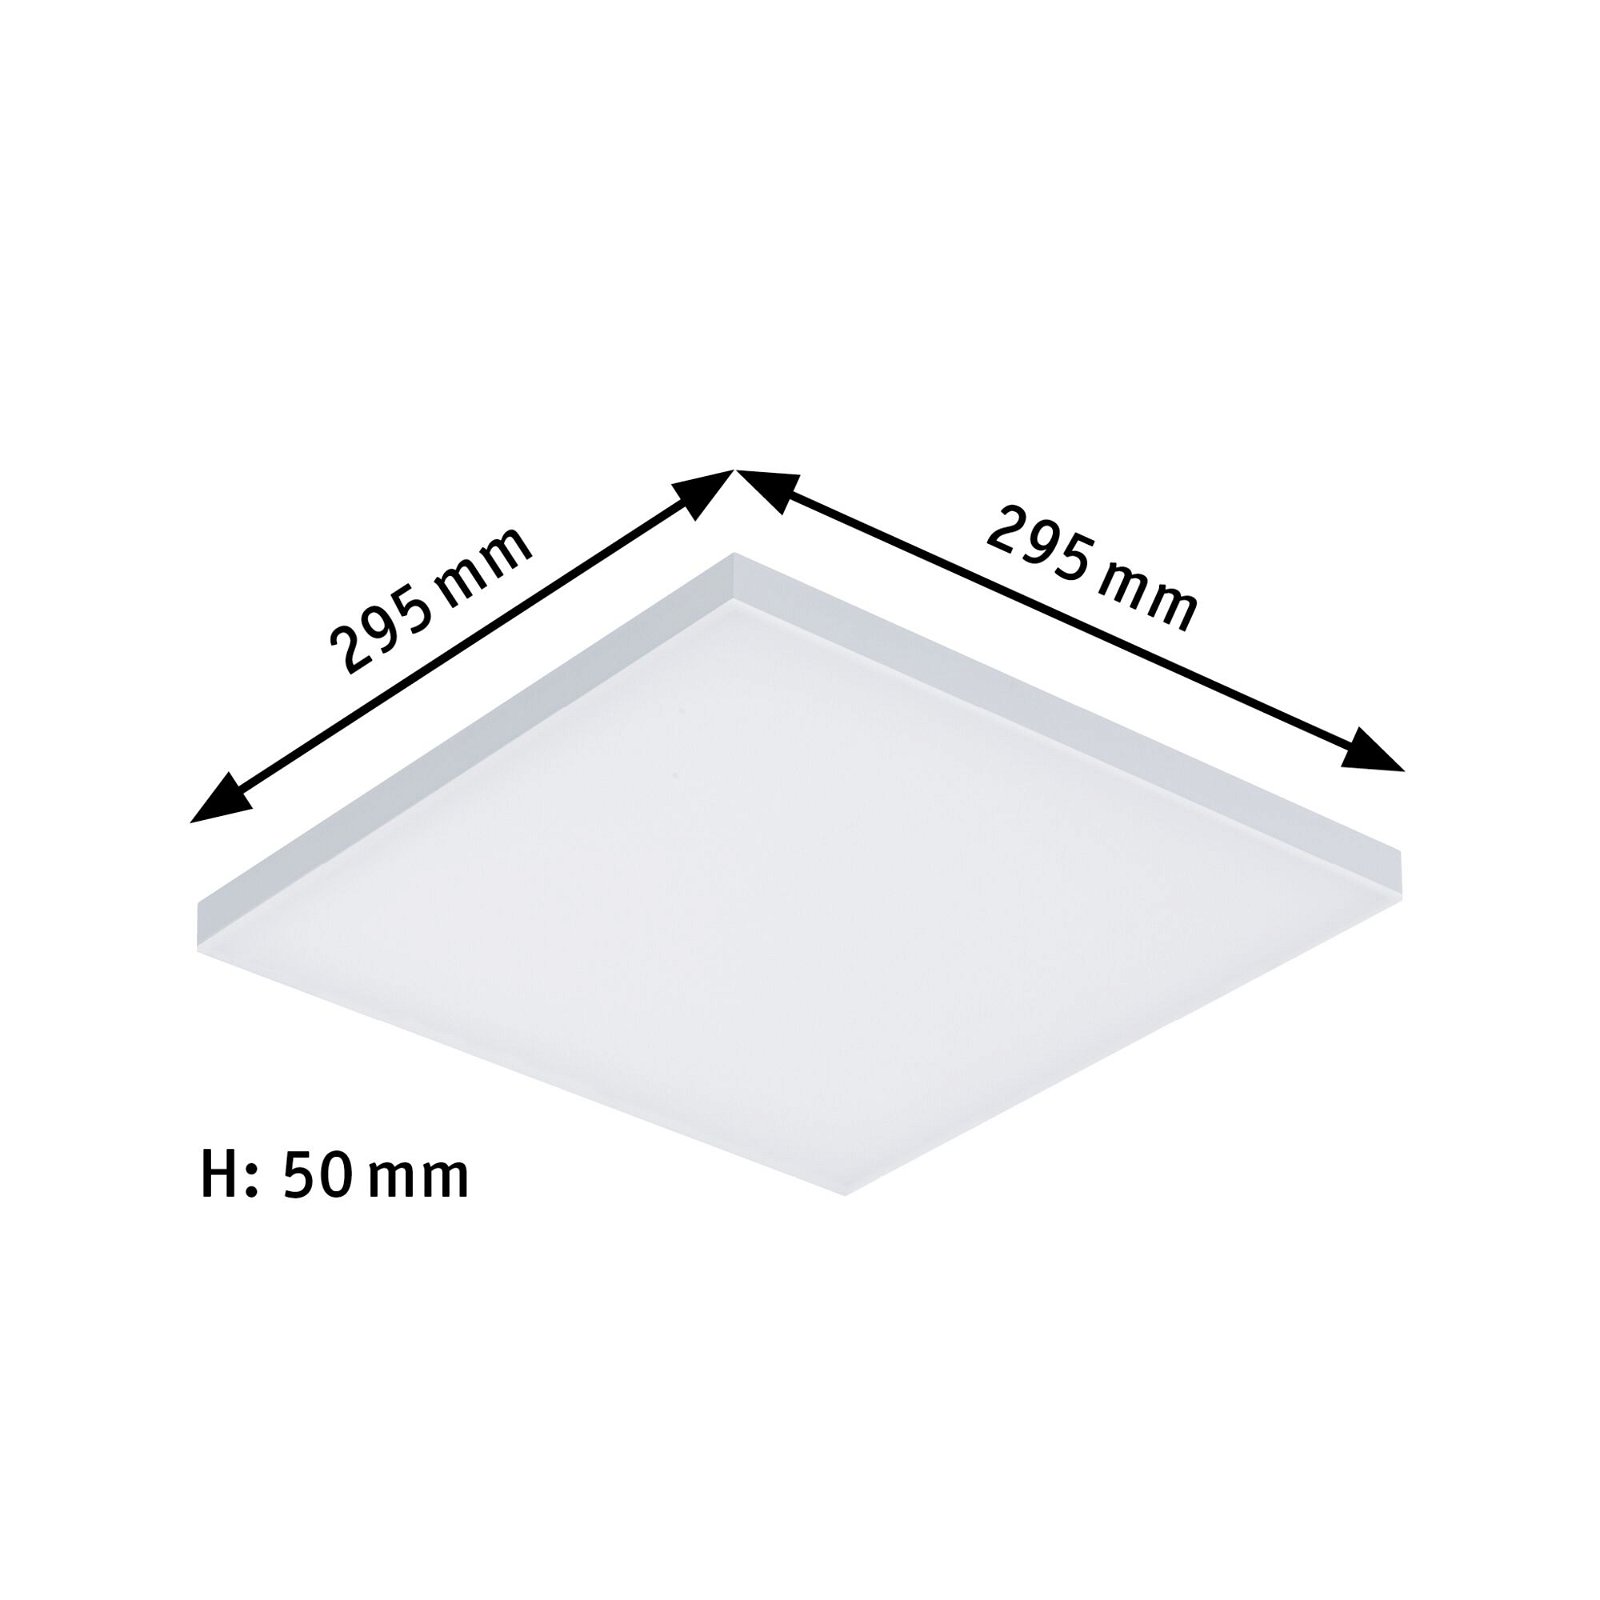 LED Panel Smart Home Zigbee 3.0 Velora square 295x295mm 10,5W 1100lm Tunable White Matt white dimmable